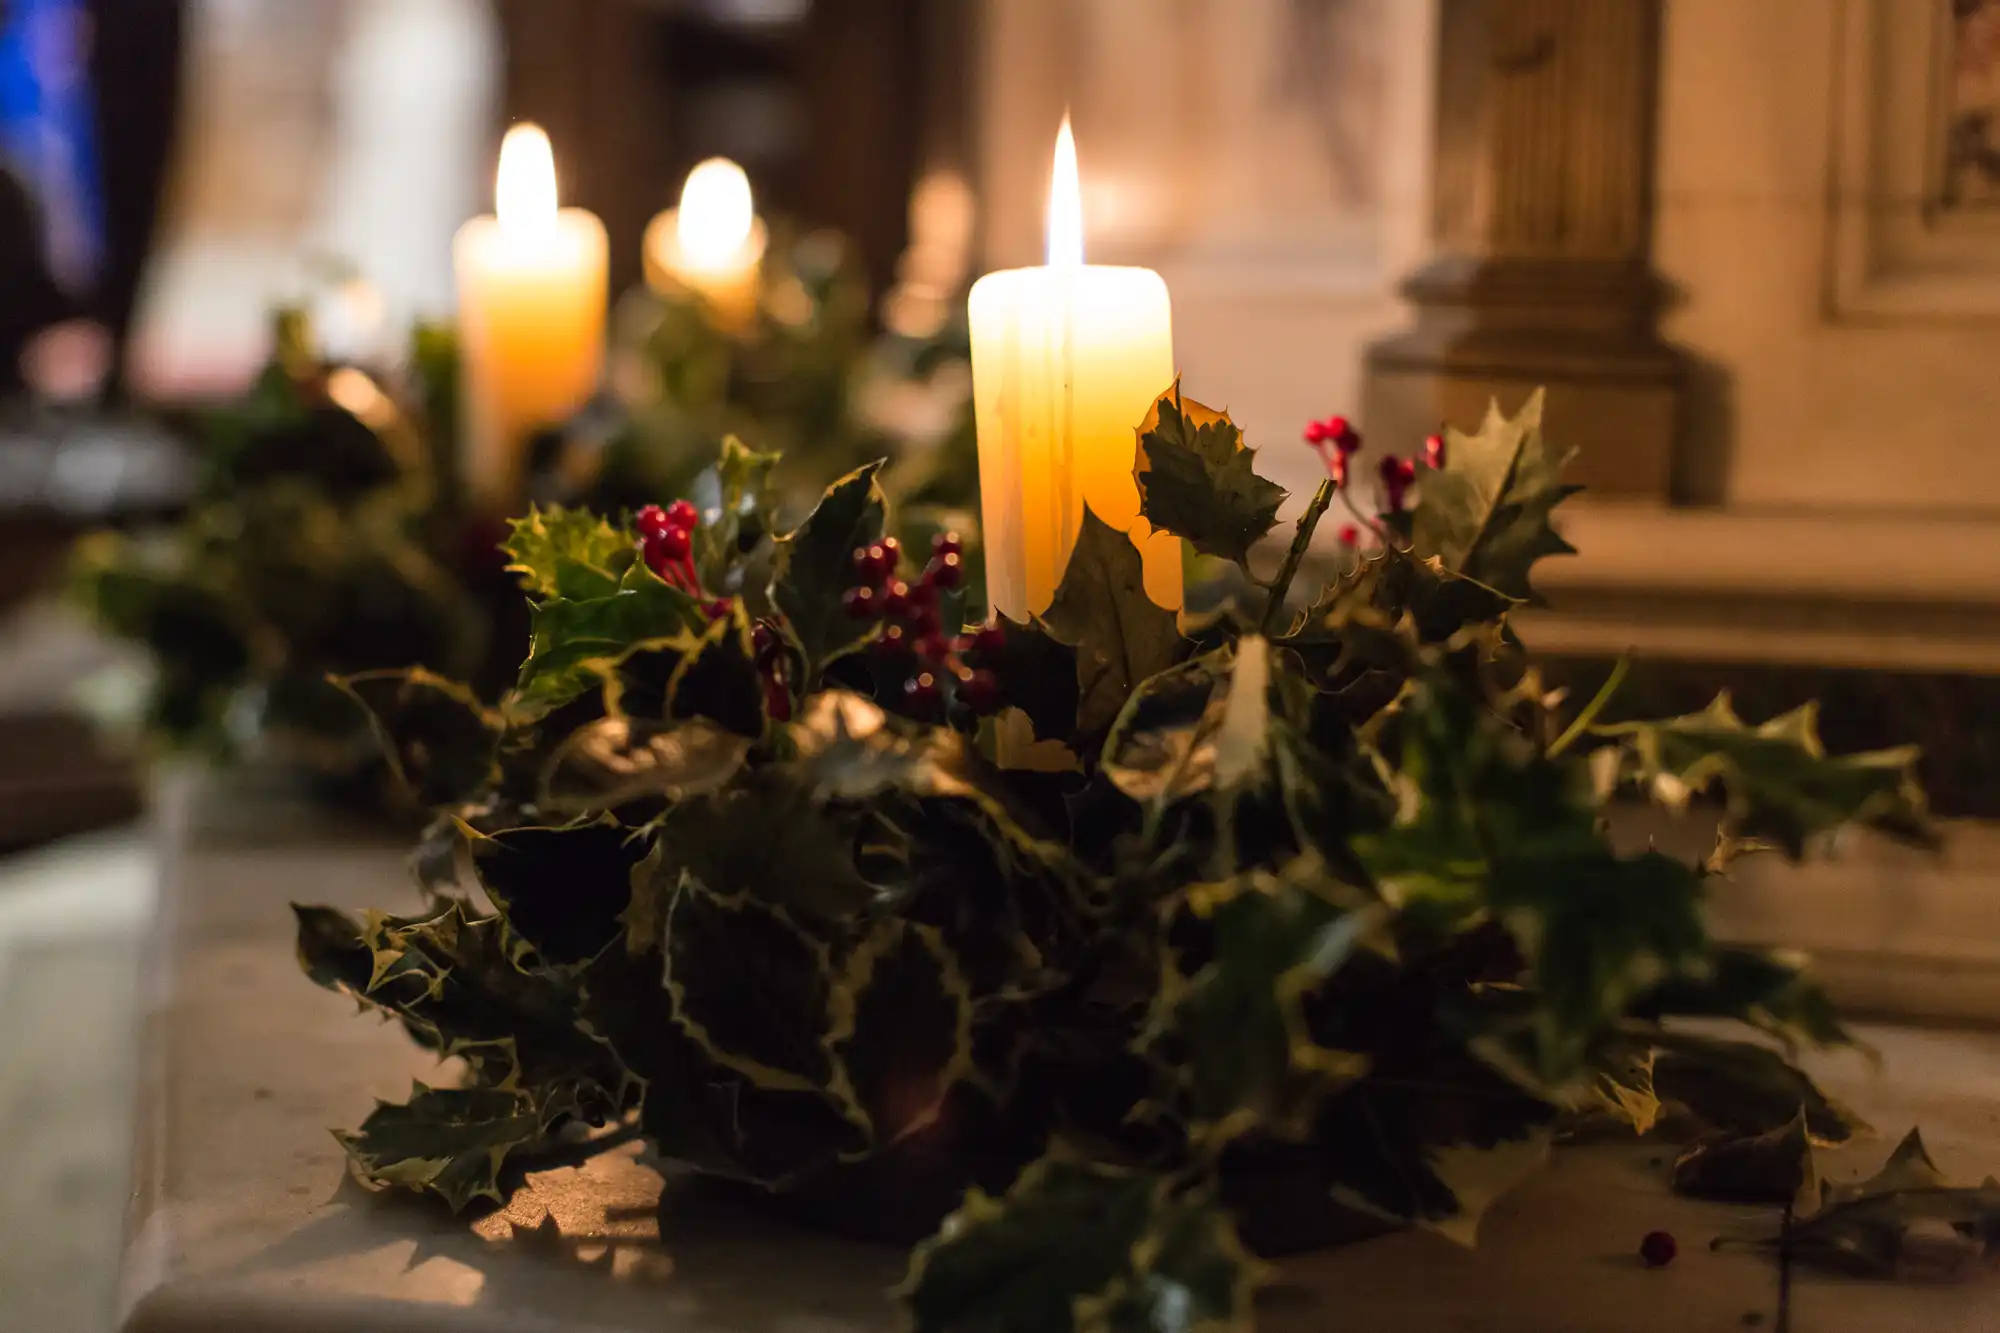 Lit candles surrounded by holly and ivy on a church altar, casting a warm glow in a dimly lit setting.